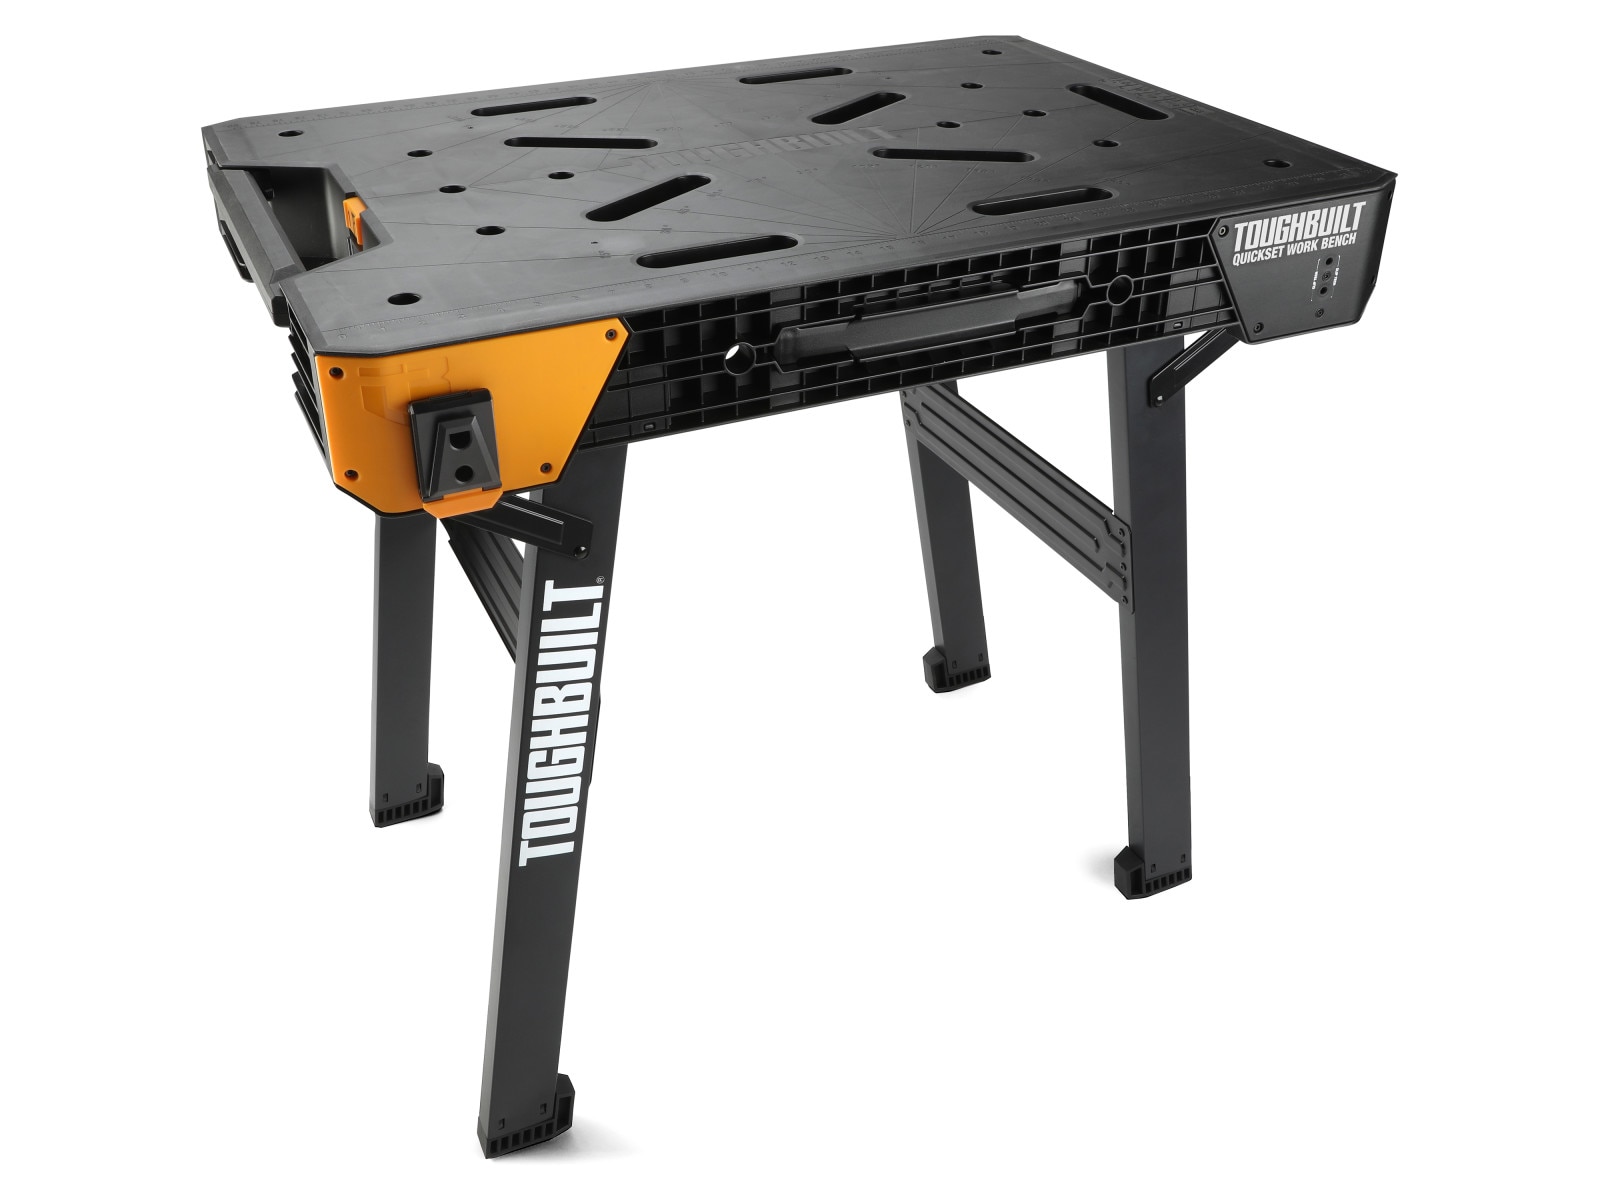 Work Benches & Tops at Lowes.com